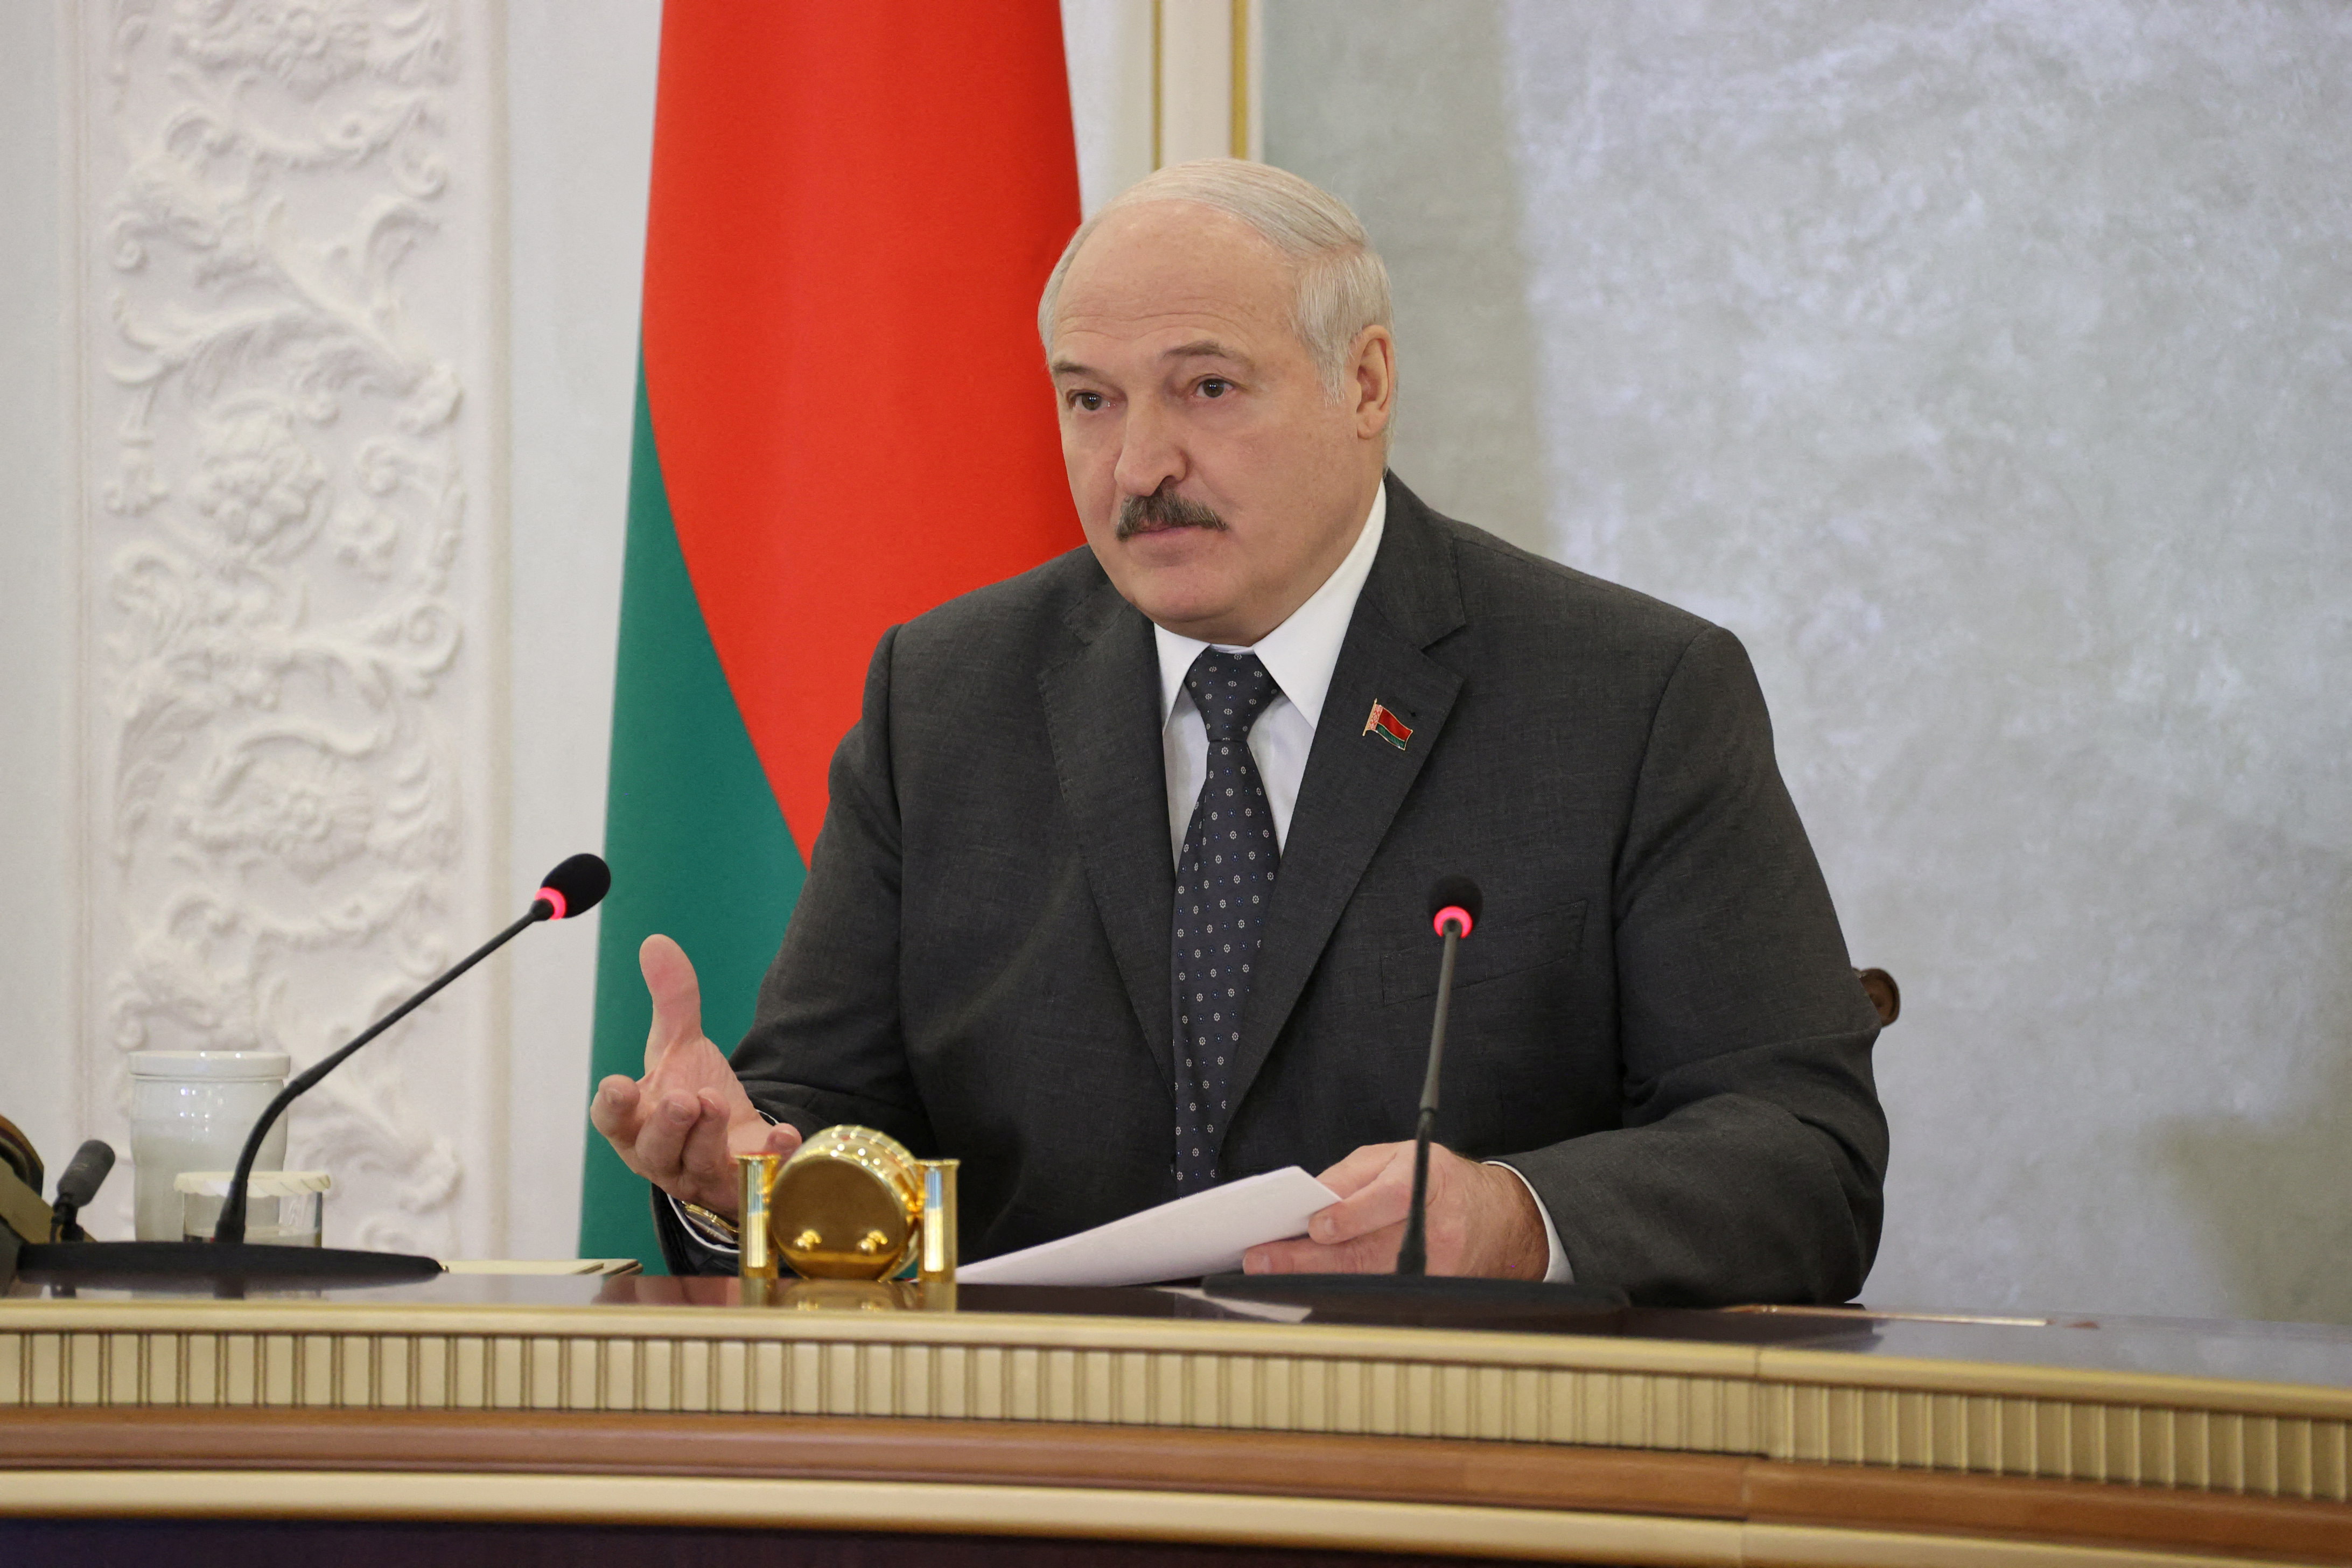 Belarusian President Lukashenko chairs a meeting with members of the Security Council in Minsk